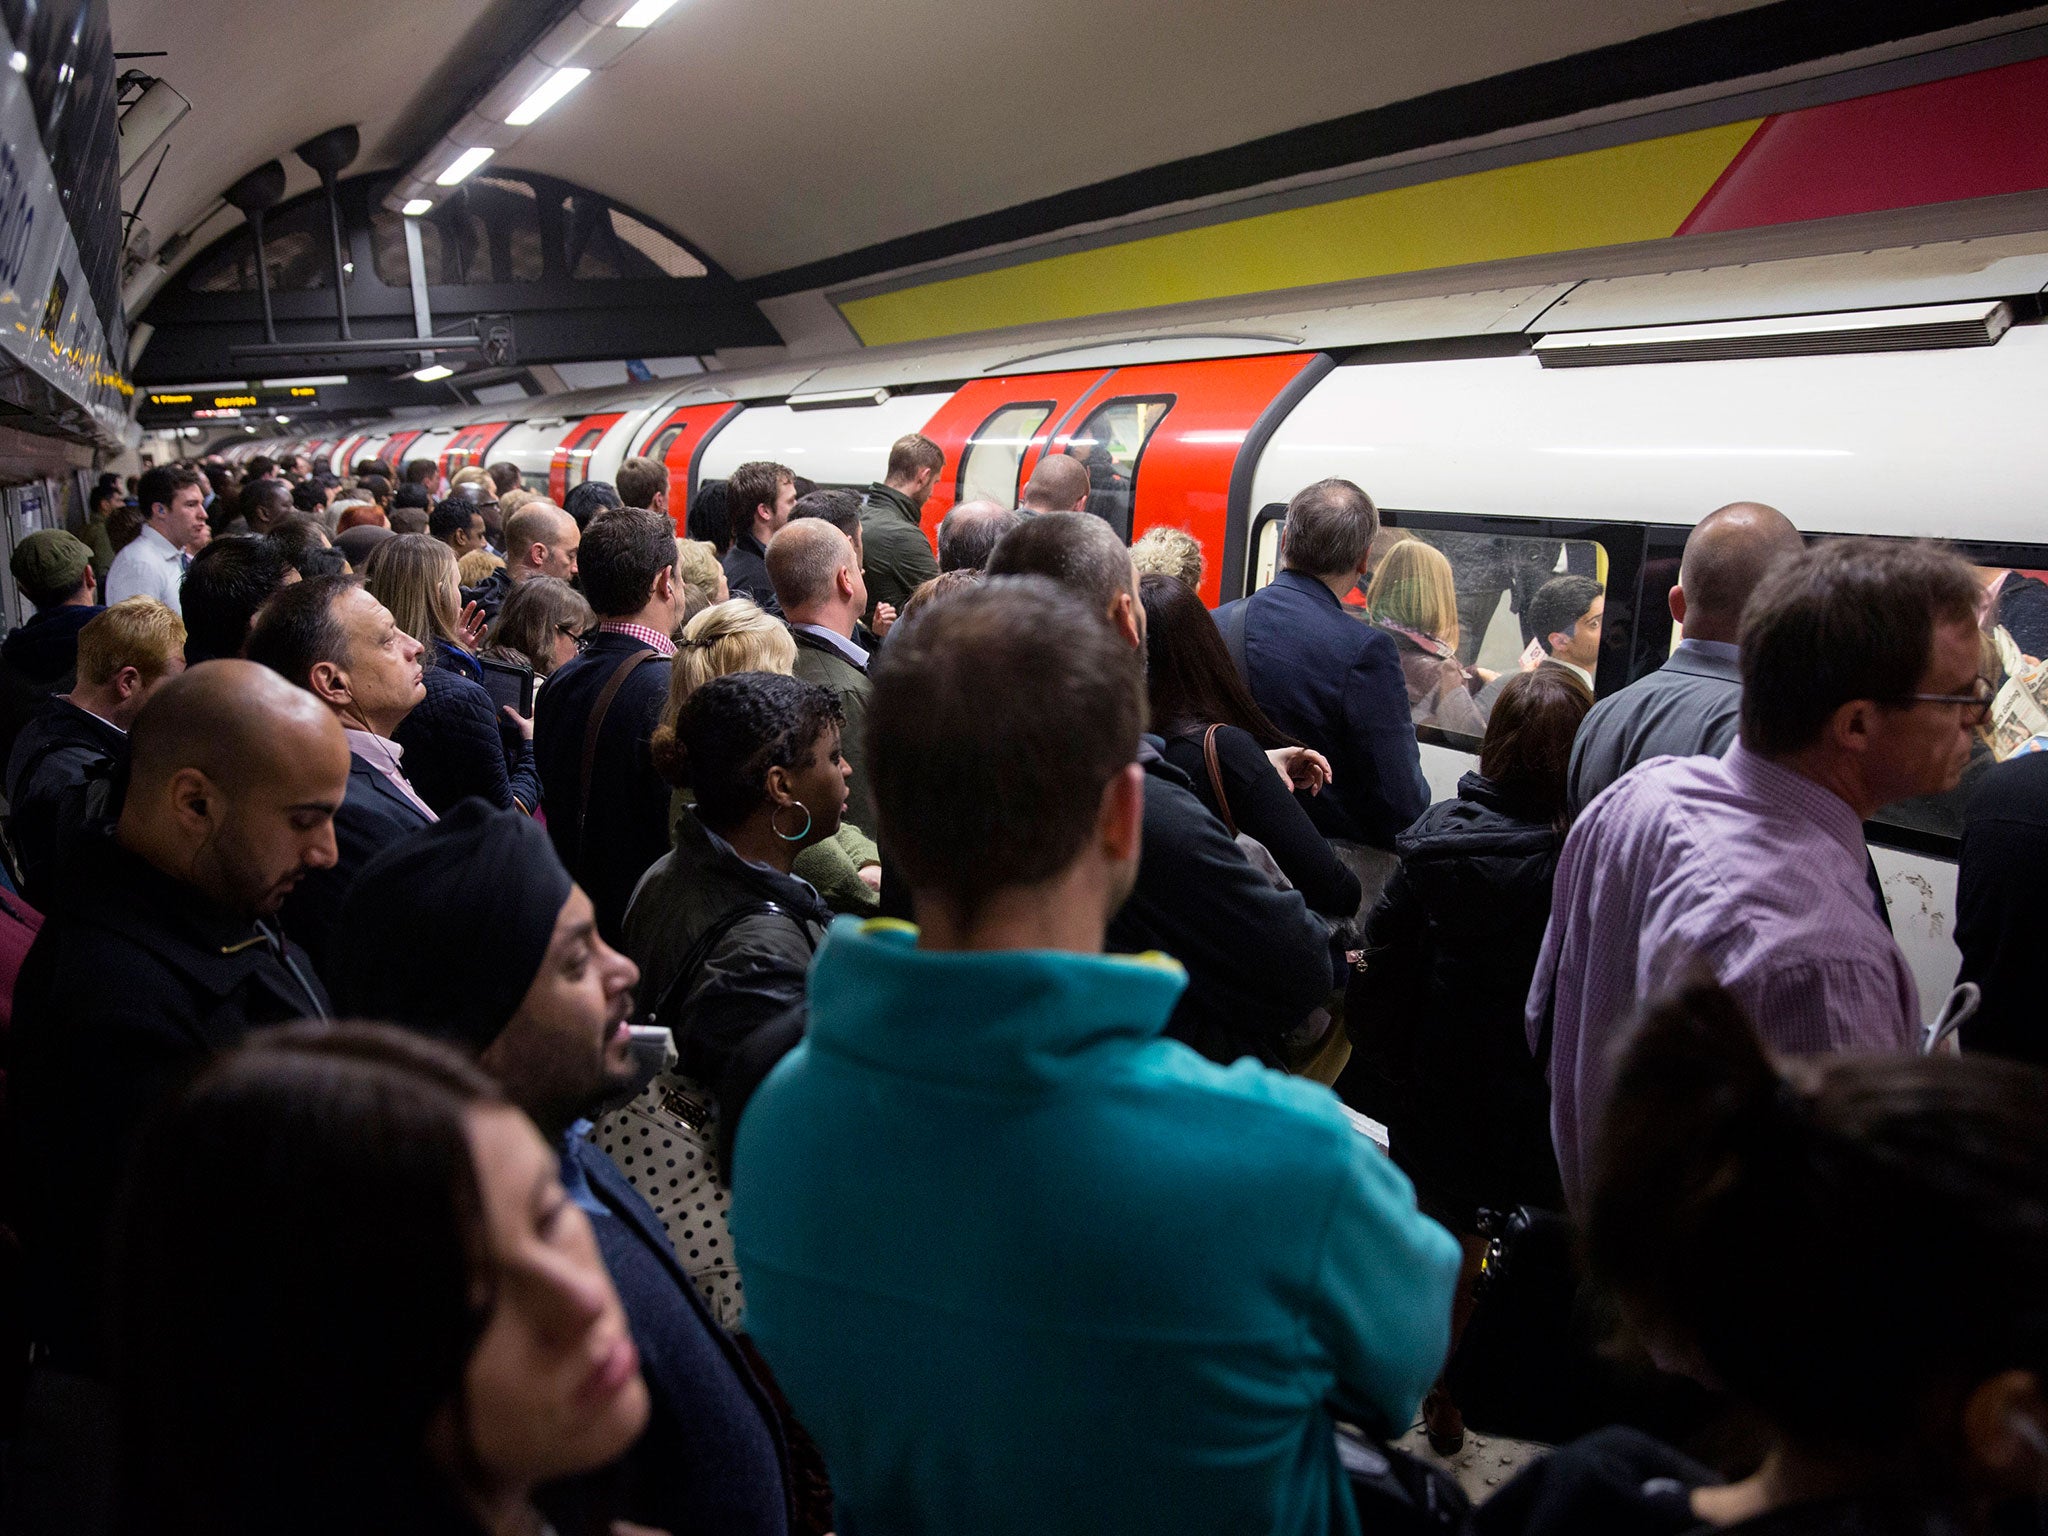 King's Cross St Pancras and Oxford Circus were closed to prevent overcrowding